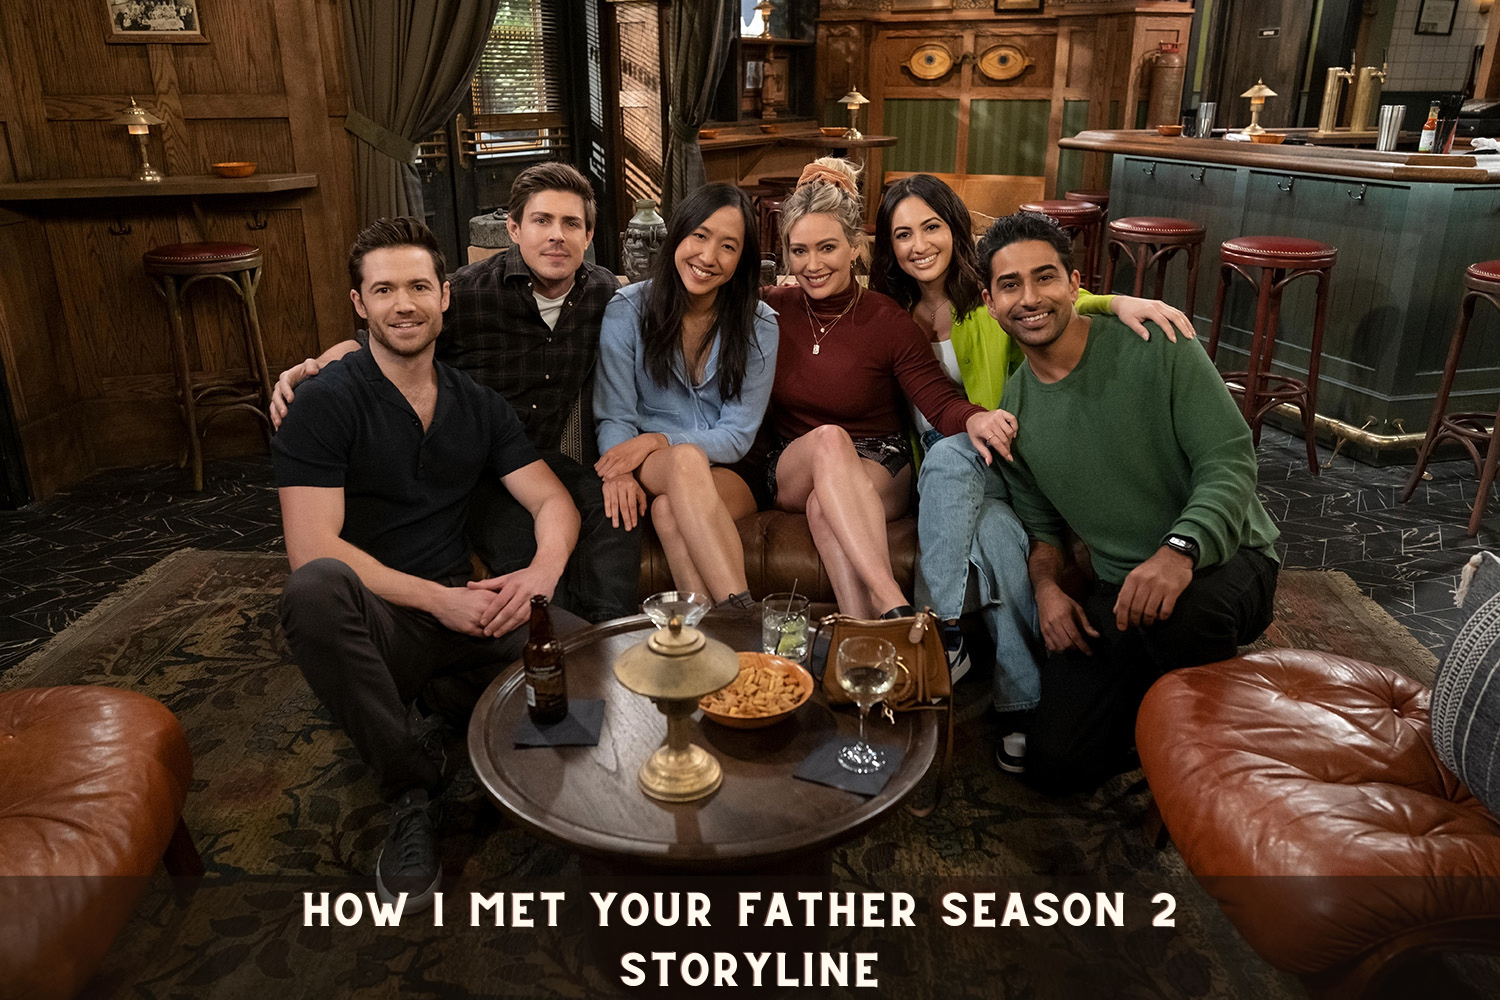 How I Met Your Father Season 2 Storyline